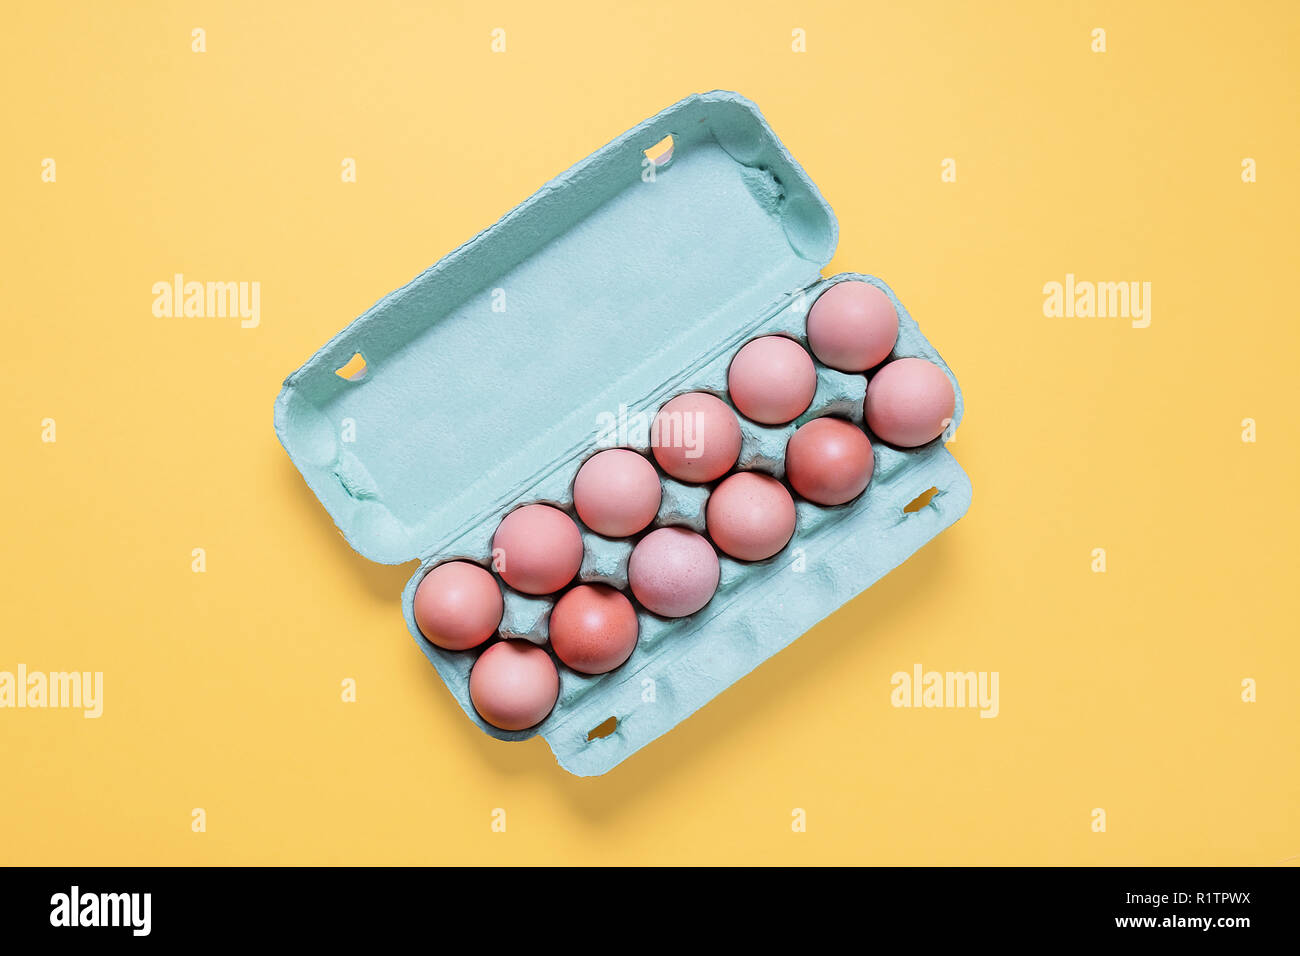 Top view of dozen free range brown eggs in carton.  Twelve brown eggs in crate container on a bright pastel yellow background Stock Photo